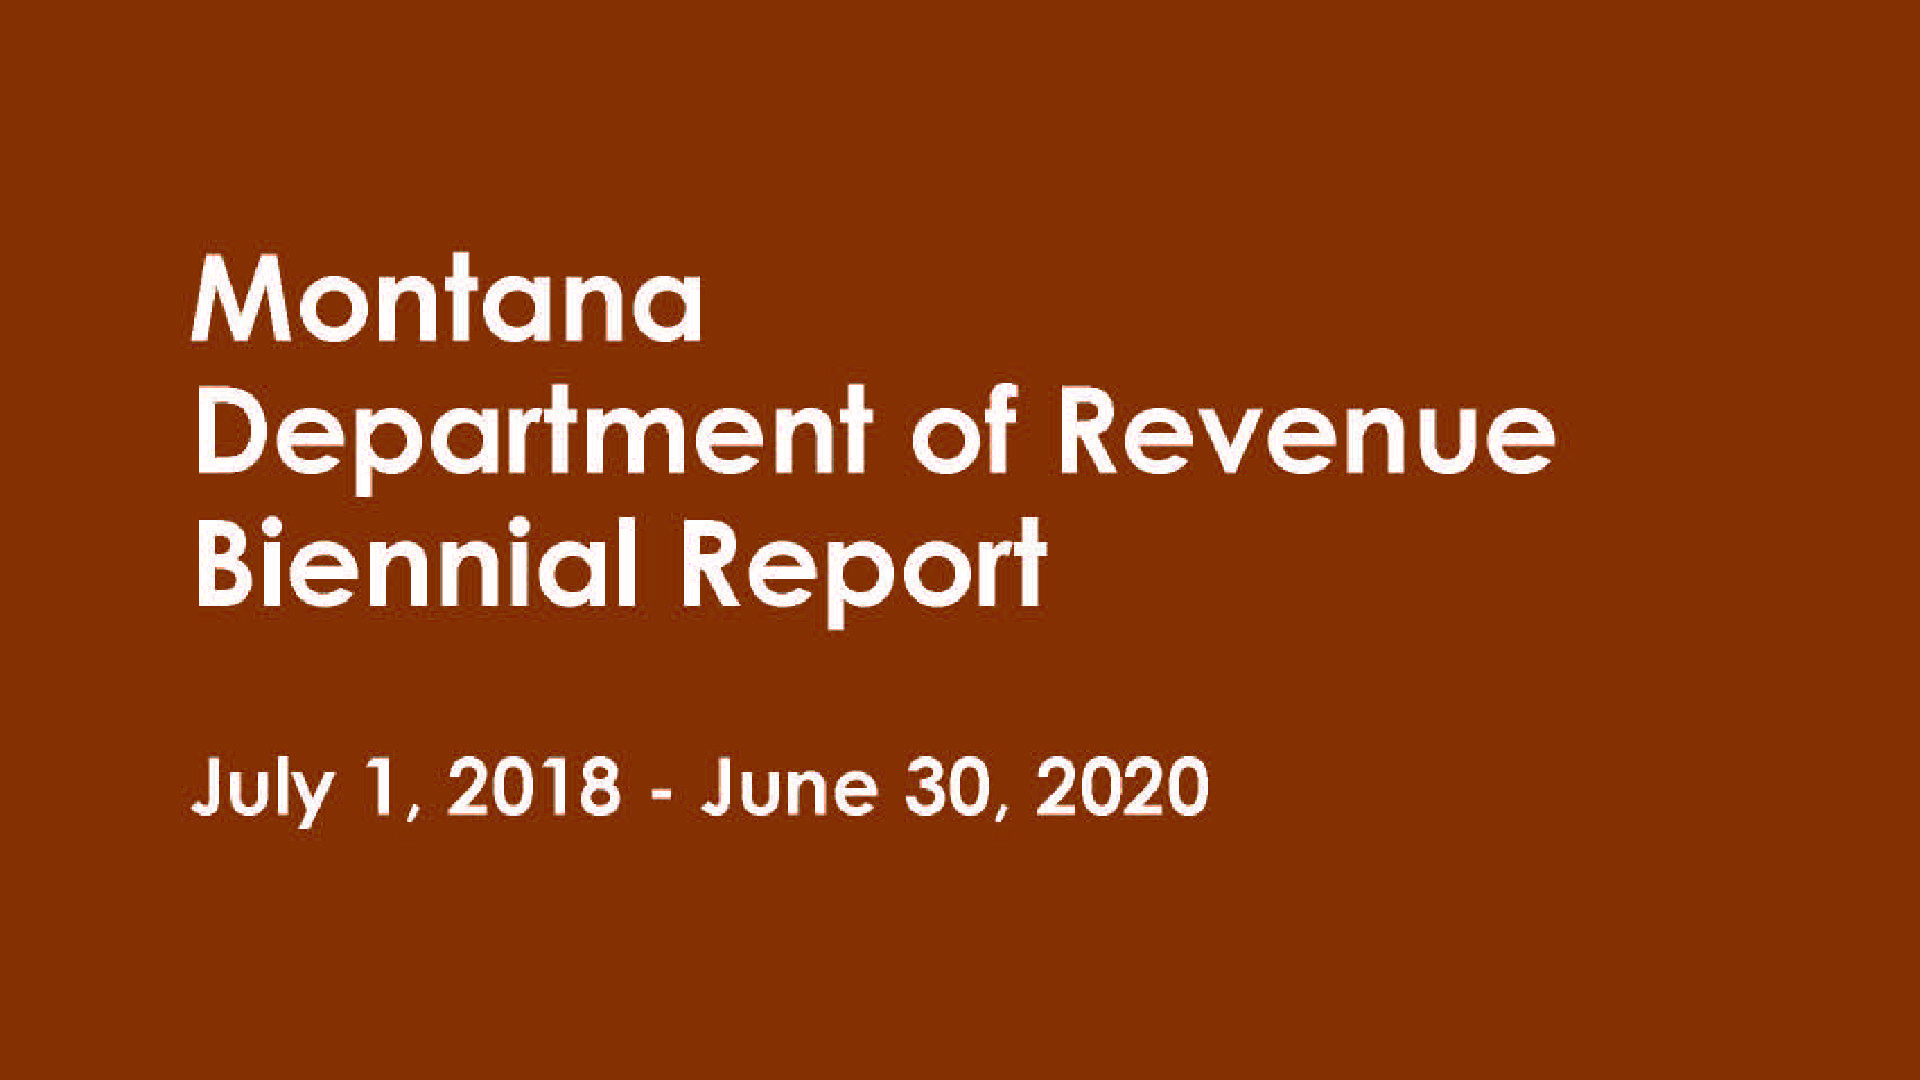 2019-2020 Biennial Report Now Available